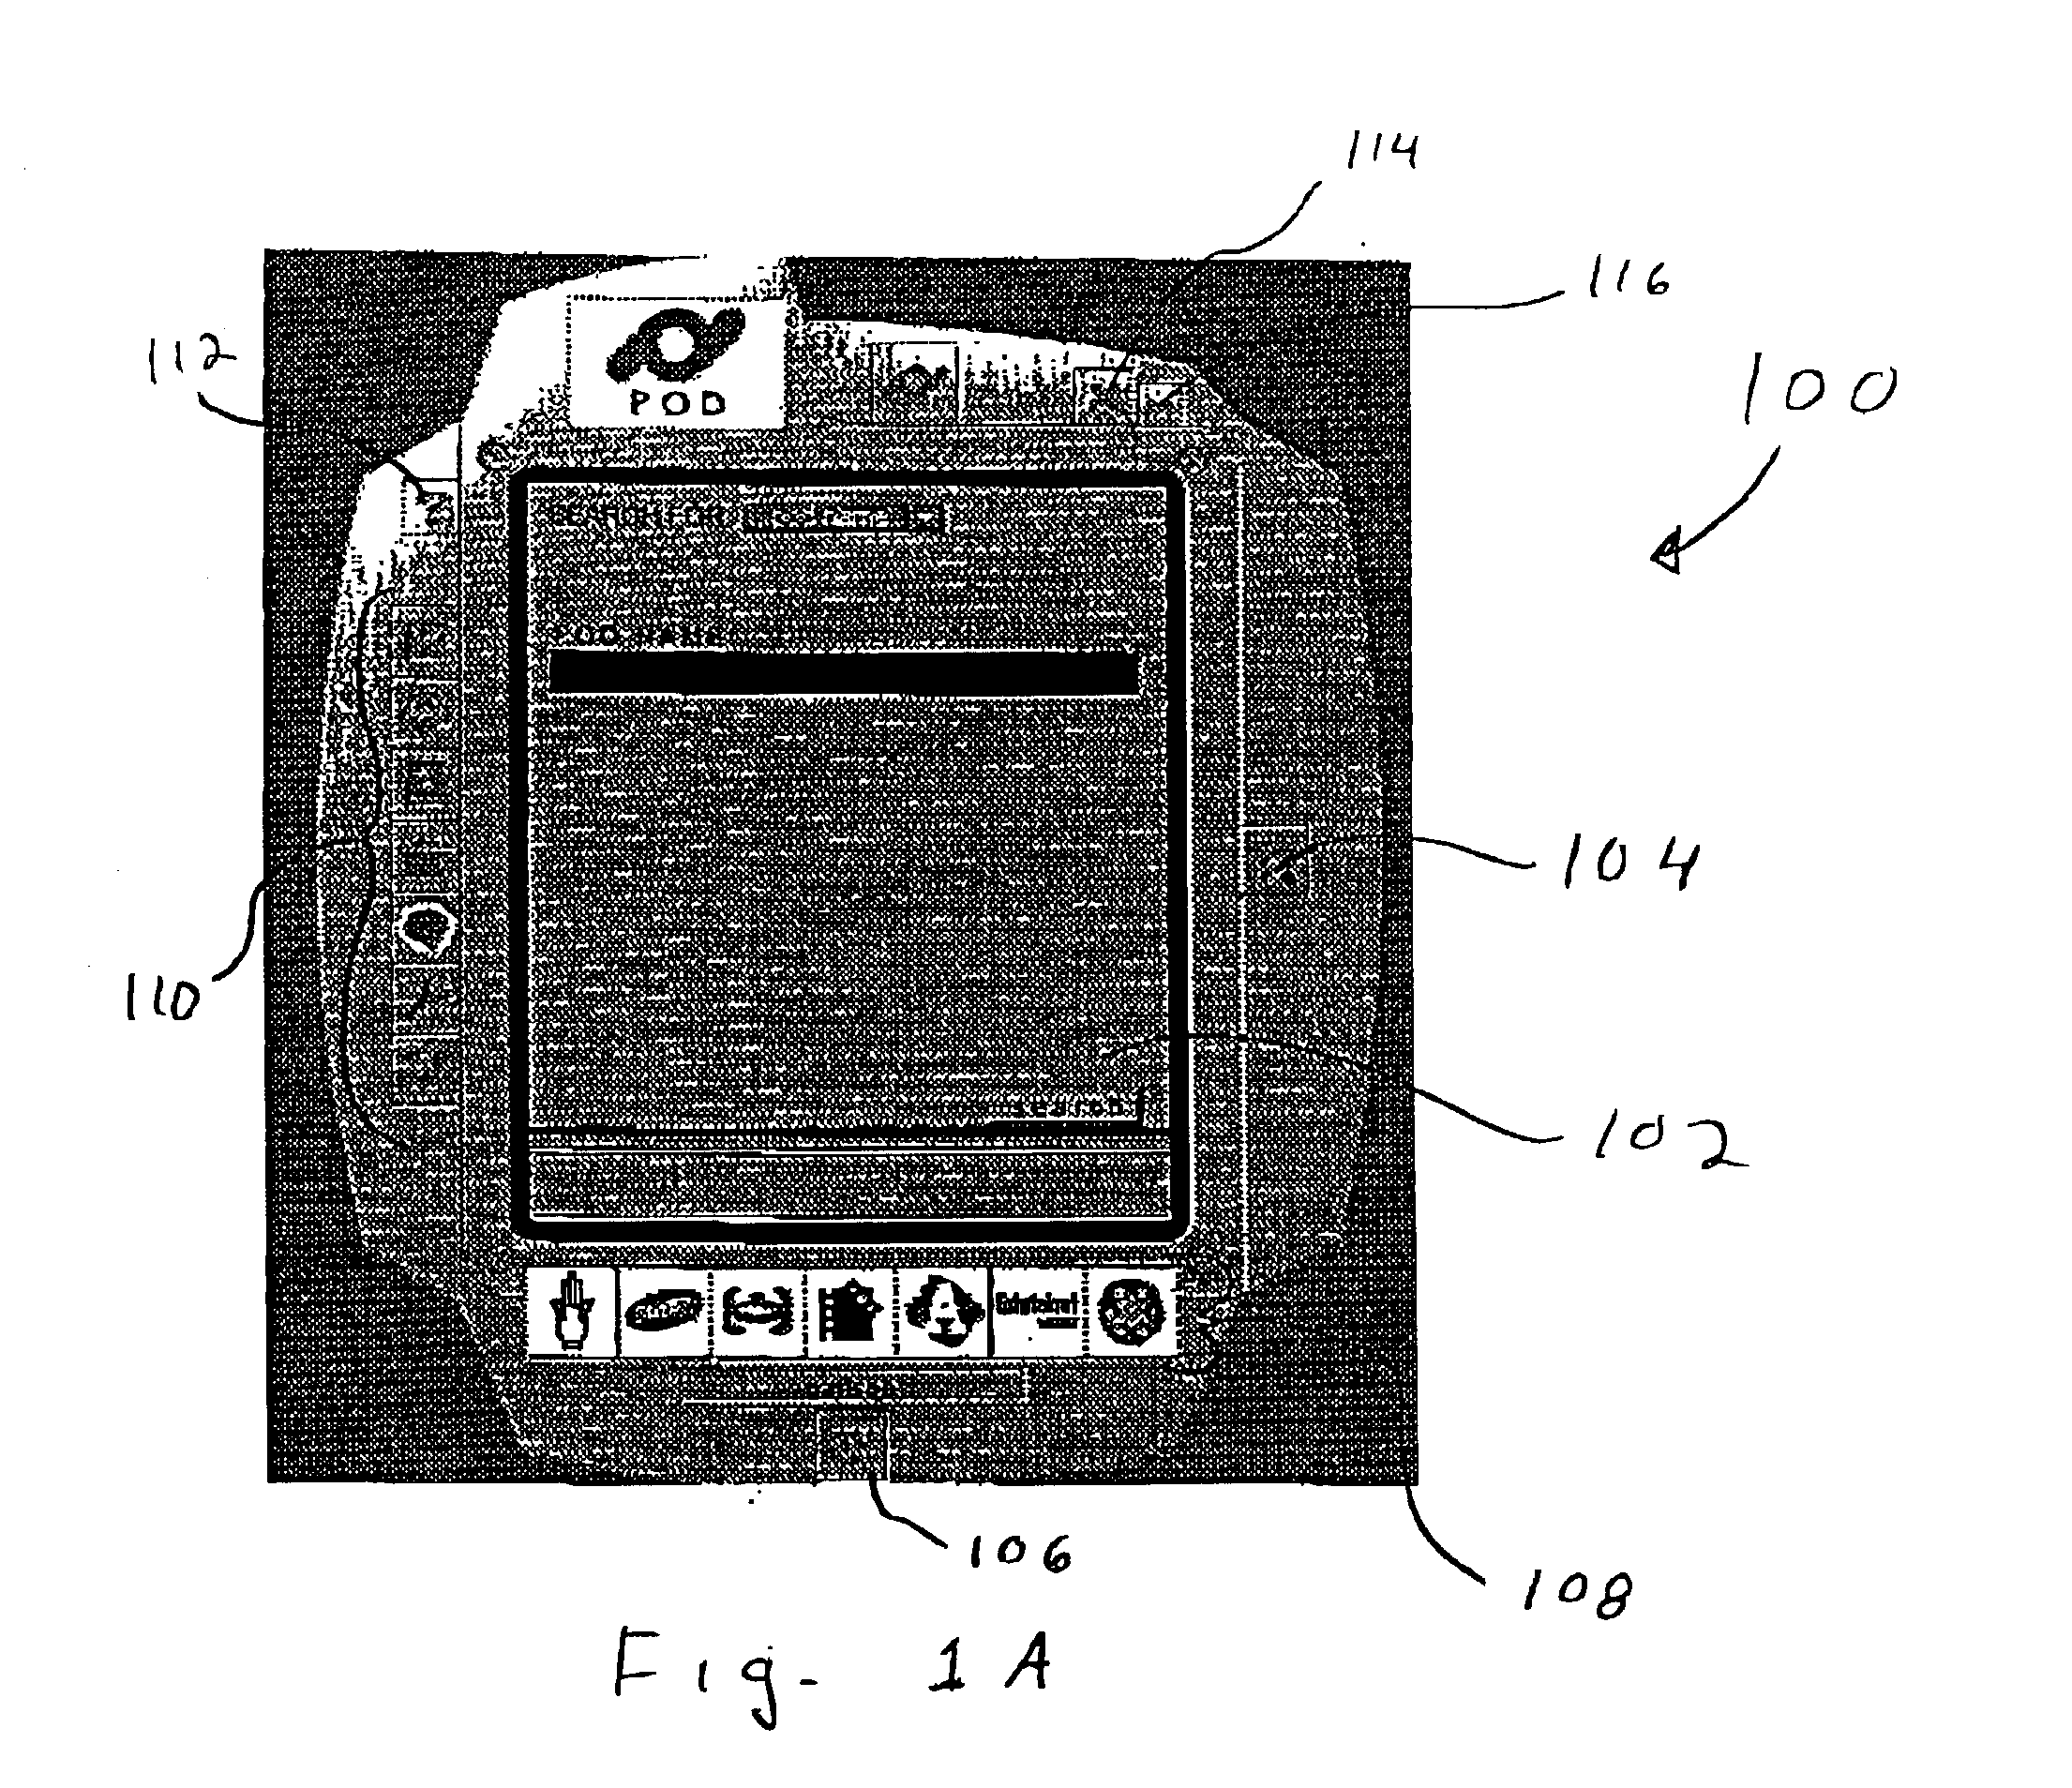 Integrated system and method of providing online access to files